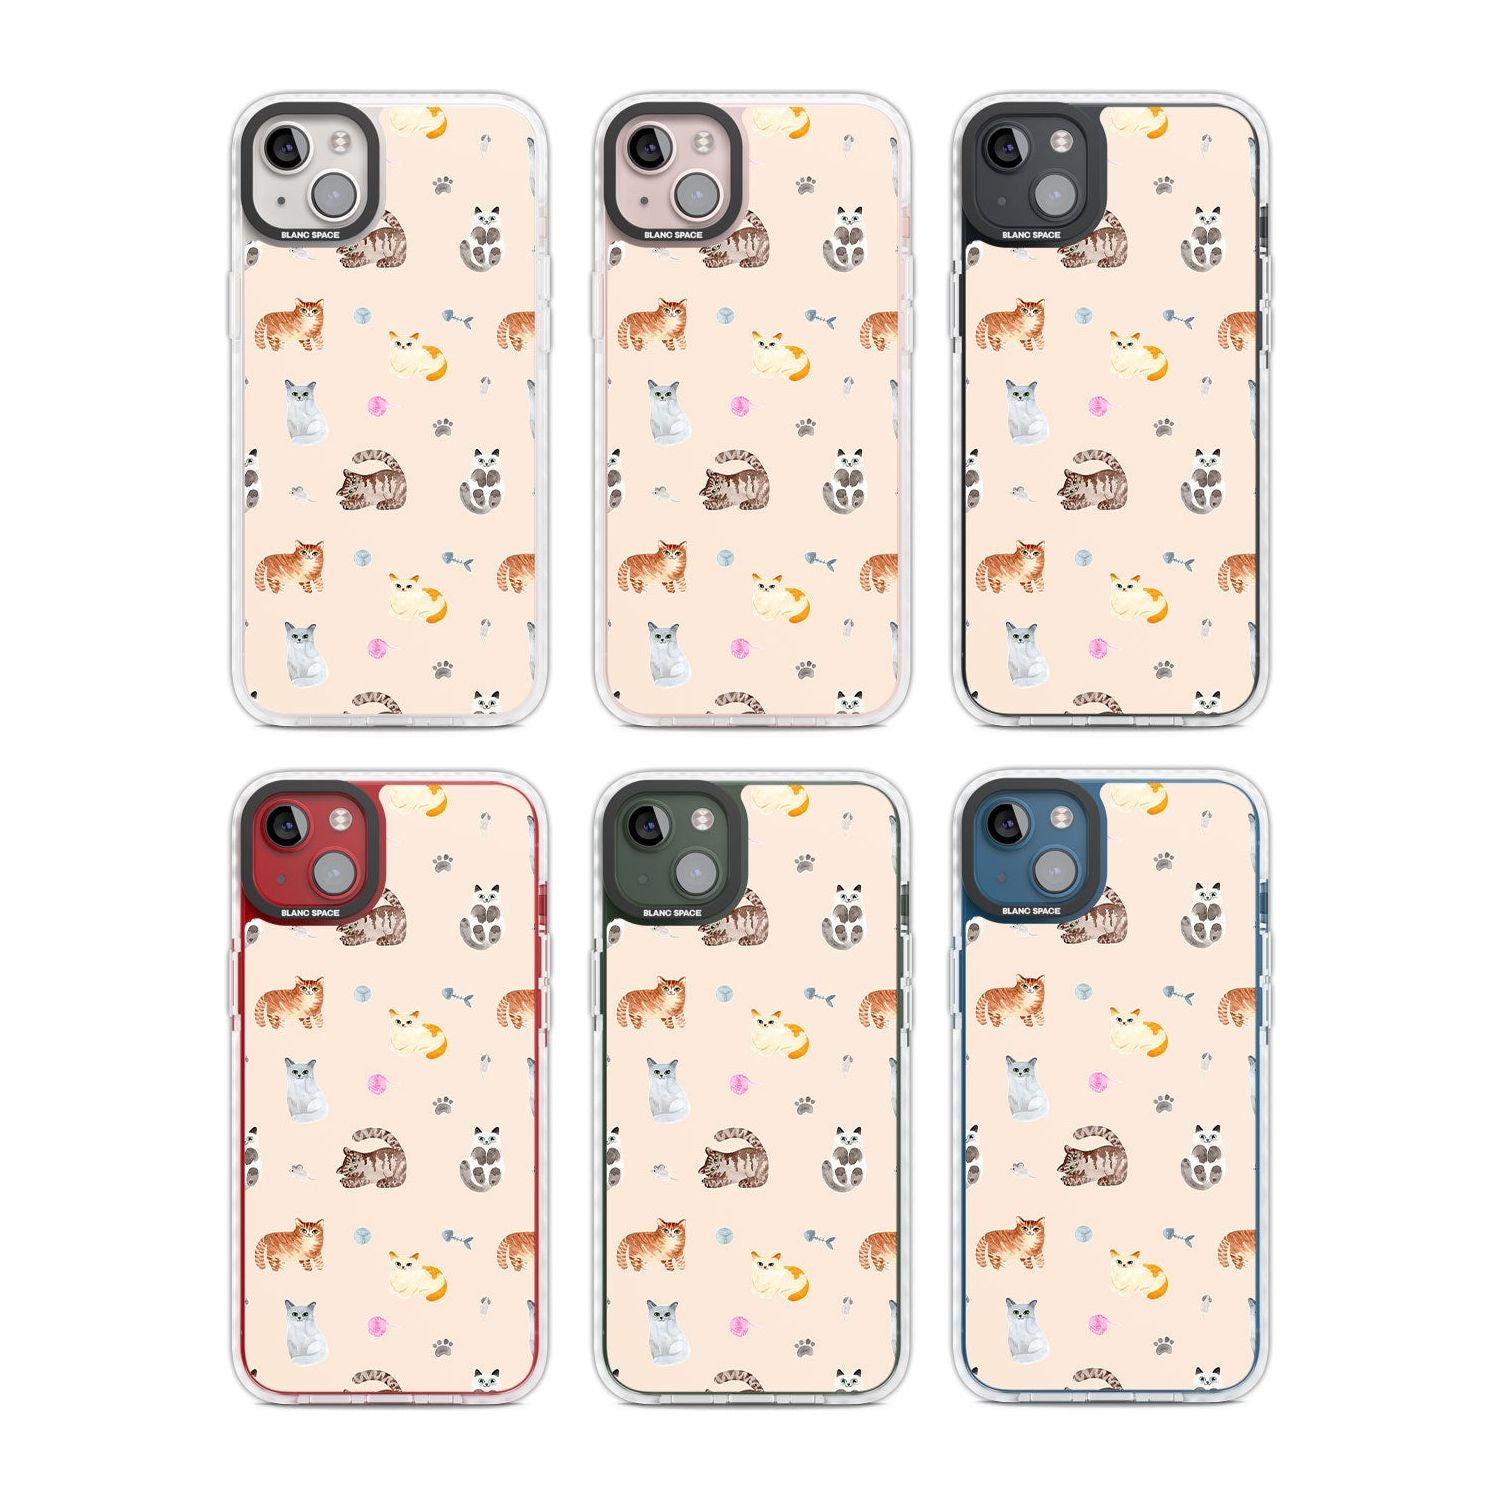 Cats with Toys Phone Case iPhone 15 Pro Max / Black Impact Case,iPhone 15 Plus / Black Impact Case,iPhone 15 Pro / Black Impact Case,iPhone 15 / Black Impact Case,iPhone 15 Pro Max / Impact Case,iPhone 15 Plus / Impact Case,iPhone 15 Pro / Impact Case,iPhone 15 / Impact Case,iPhone 15 Pro Max / Magsafe Black Impact Case,iPhone 15 Plus / Magsafe Black Impact Case,iPhone 15 Pro / Magsafe Black Impact Case,iPhone 15 / Magsafe Black Impact Case,iPhone 14 Pro Max / Black Impact Case,iPhone 14 Plus / Black Impact